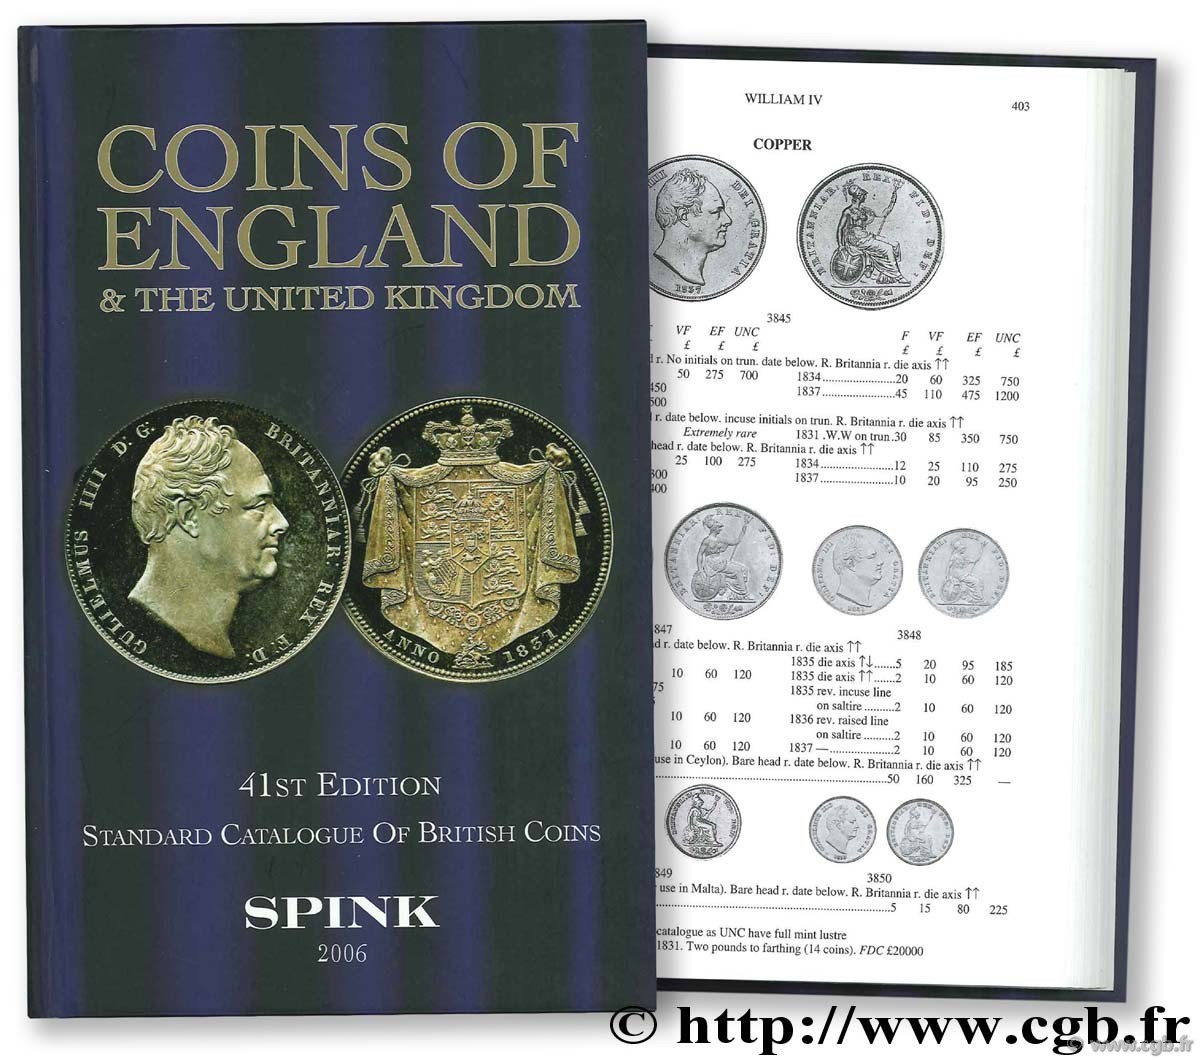 Coins of England and the United Kingdom SKINGLEY P. (dir.)